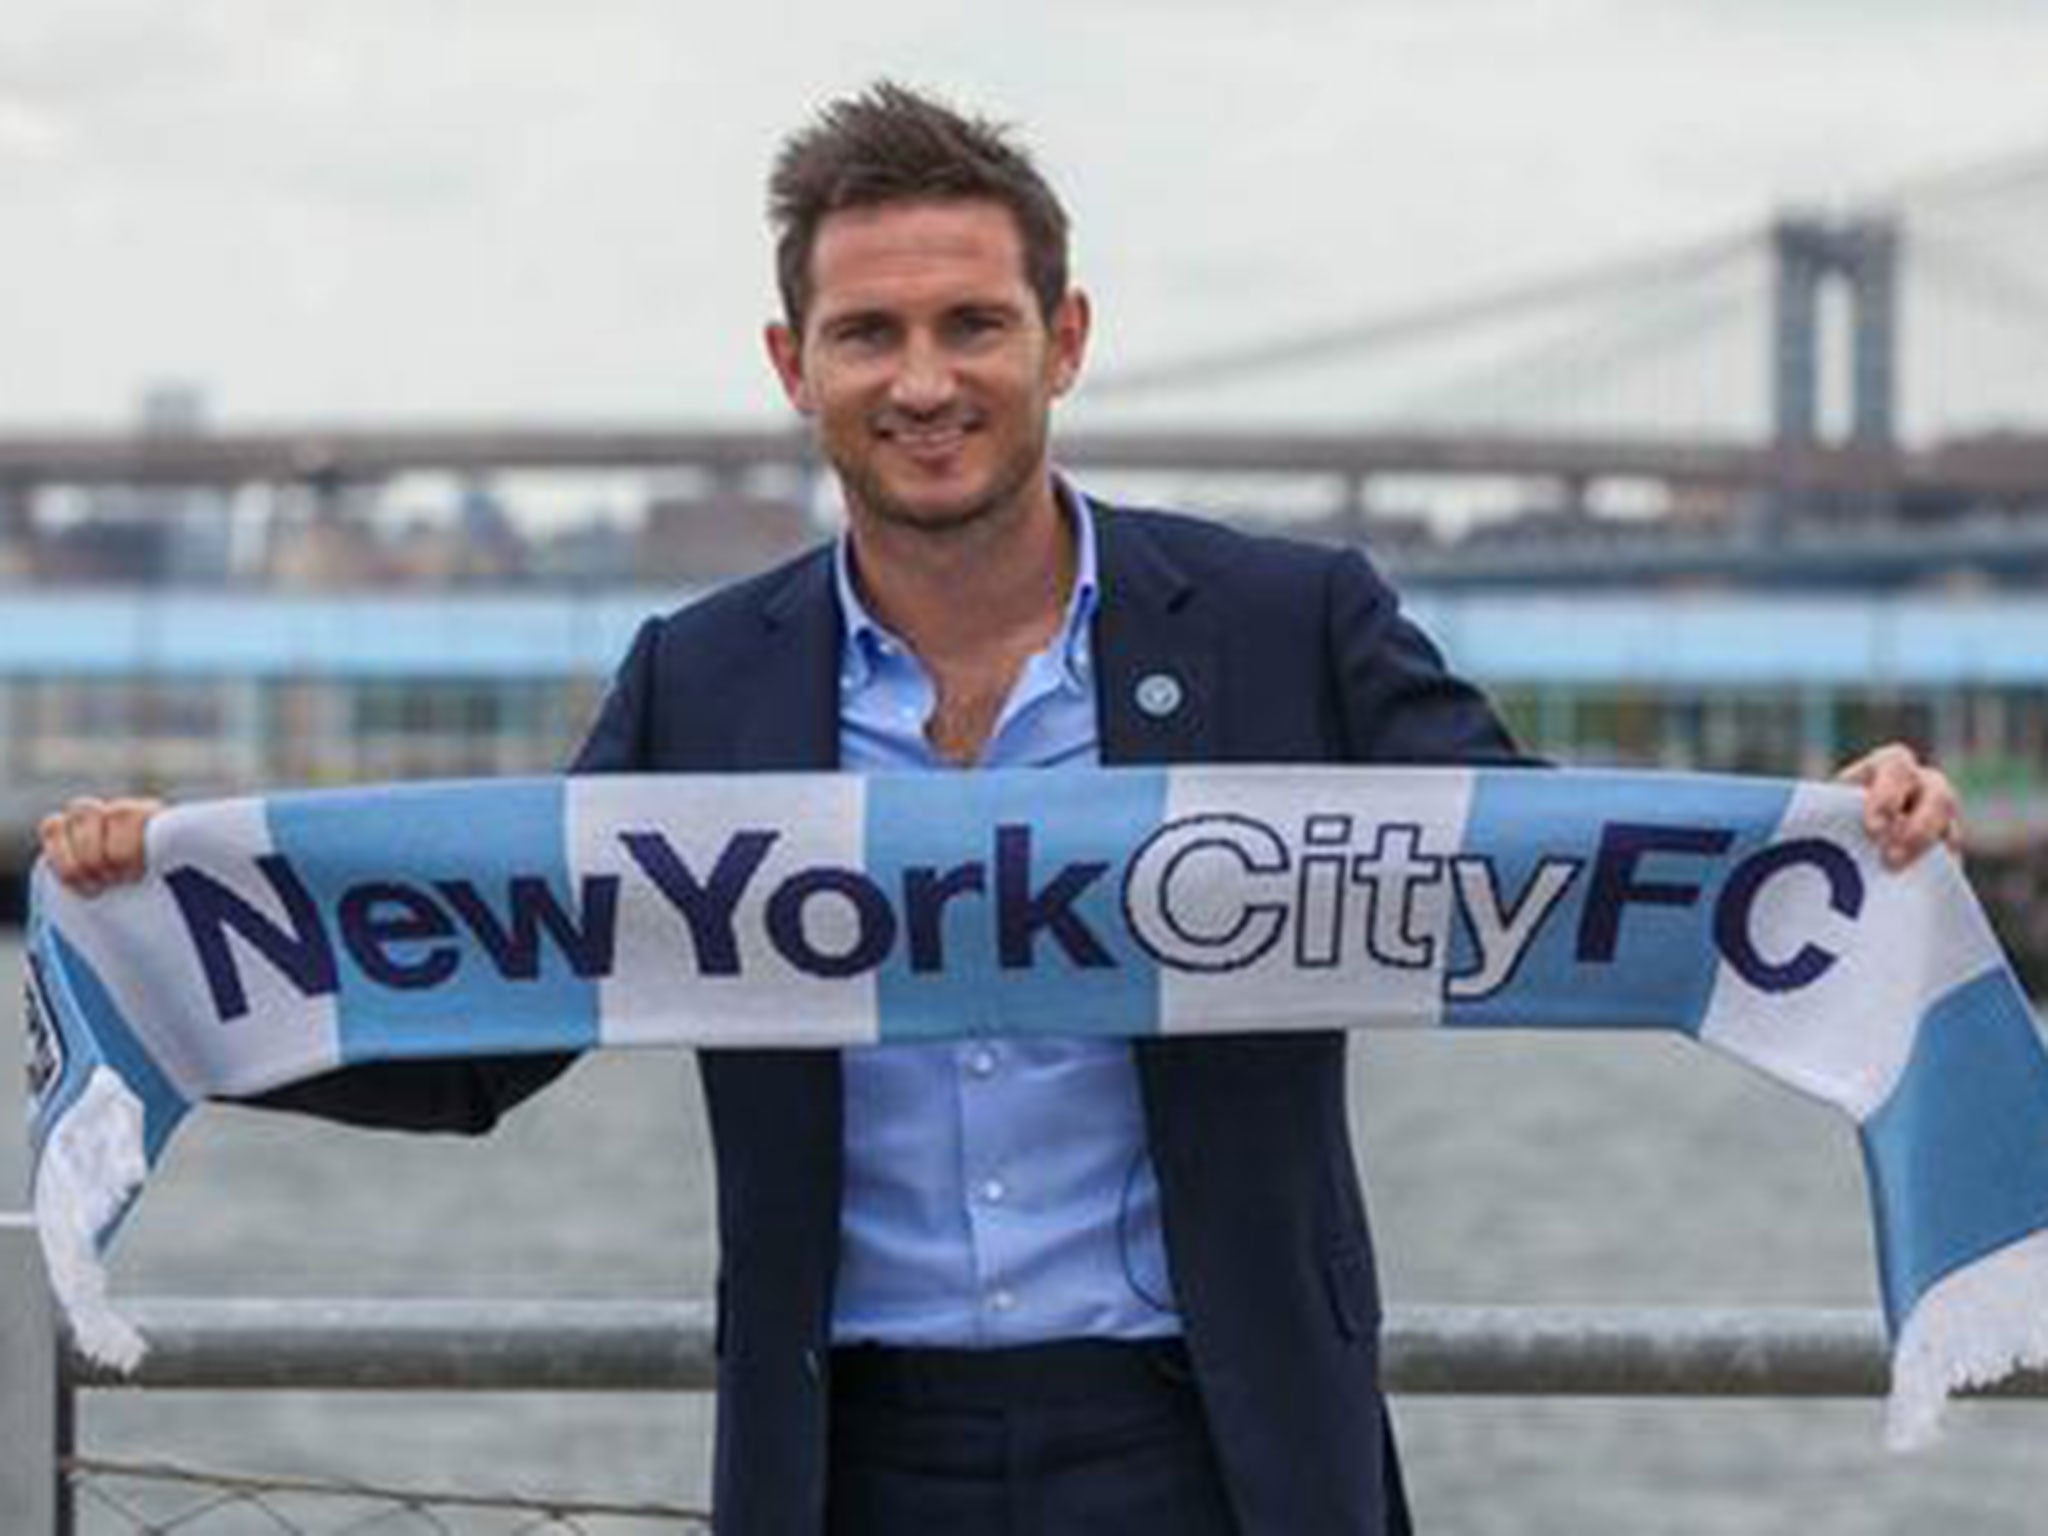 Frank Lampard is presented as a New York City FC player